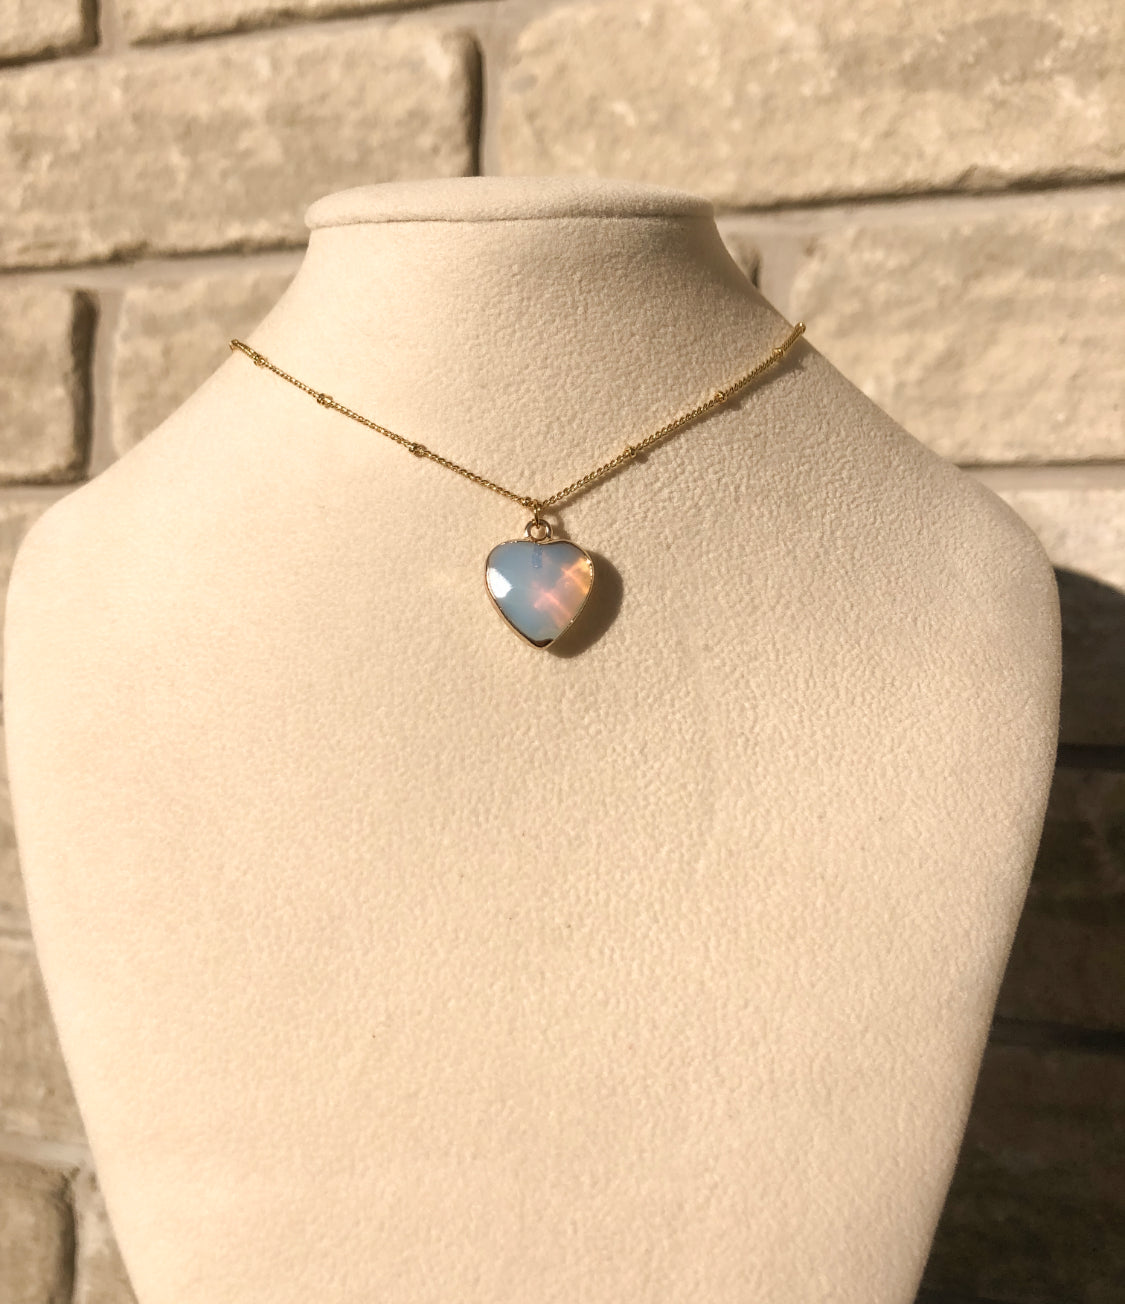 Opalite Crystal Heart Necklace